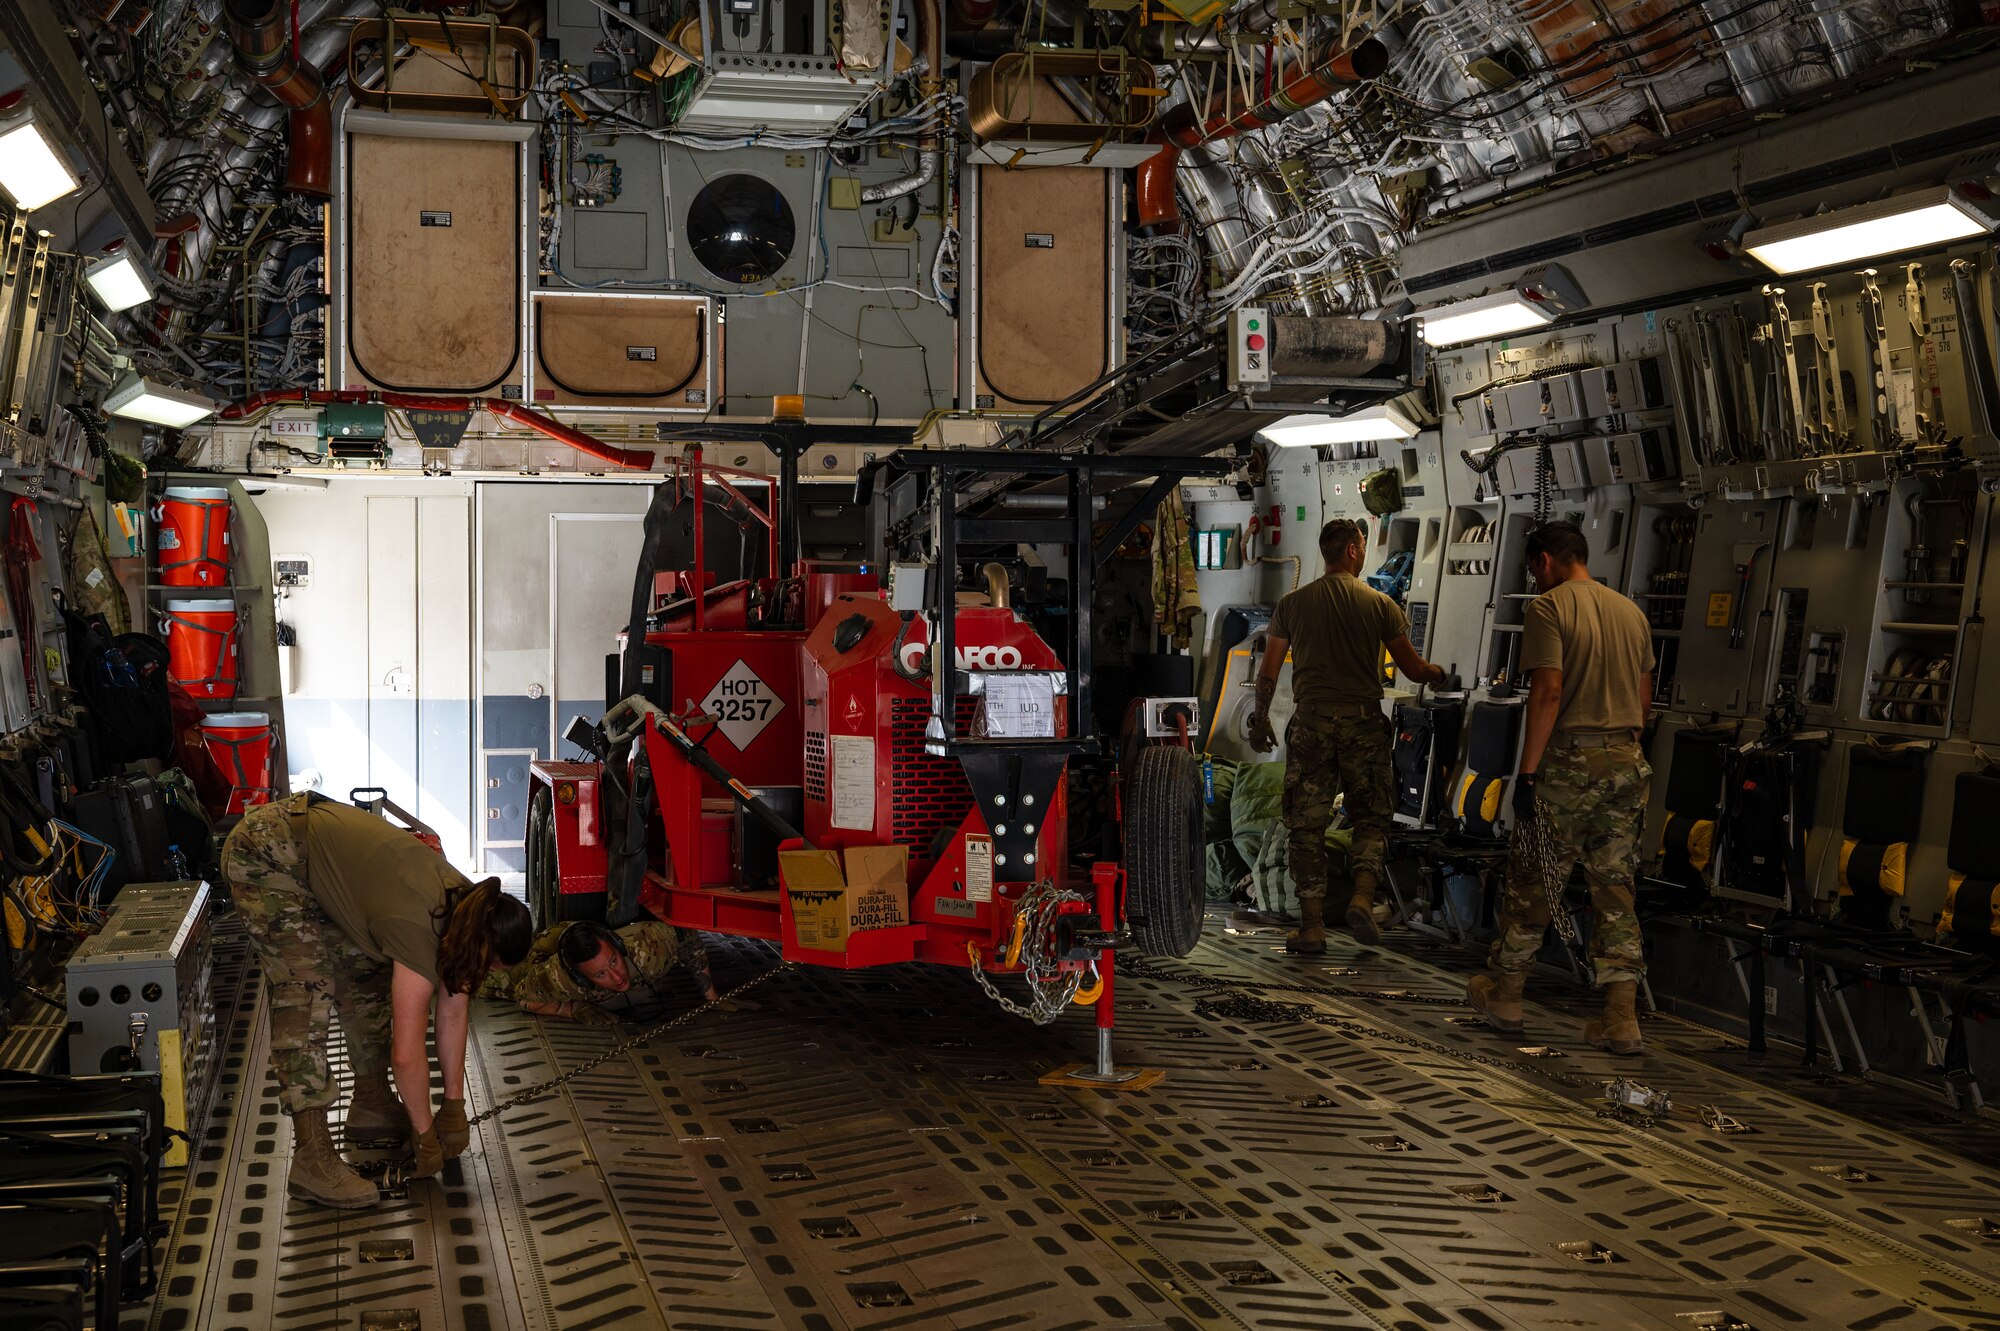 U.S. Air Force Airmen from the 379th Air Expeditionary Wing tie down machinery in a U.S. Air Force C-17 Globemaster in preparation for a departure flight during exercise Accurate Test 22 at Thumrait Air Base, Oman, May 22, 2022. Properly securing heavy cargo and equipment prior to takeoff helps prevent in-flight shifting that can cause airborne instability and compromise passenger safety.” (U.S. Air Force photo by Staff Sgt. Dana Tourtellotte)